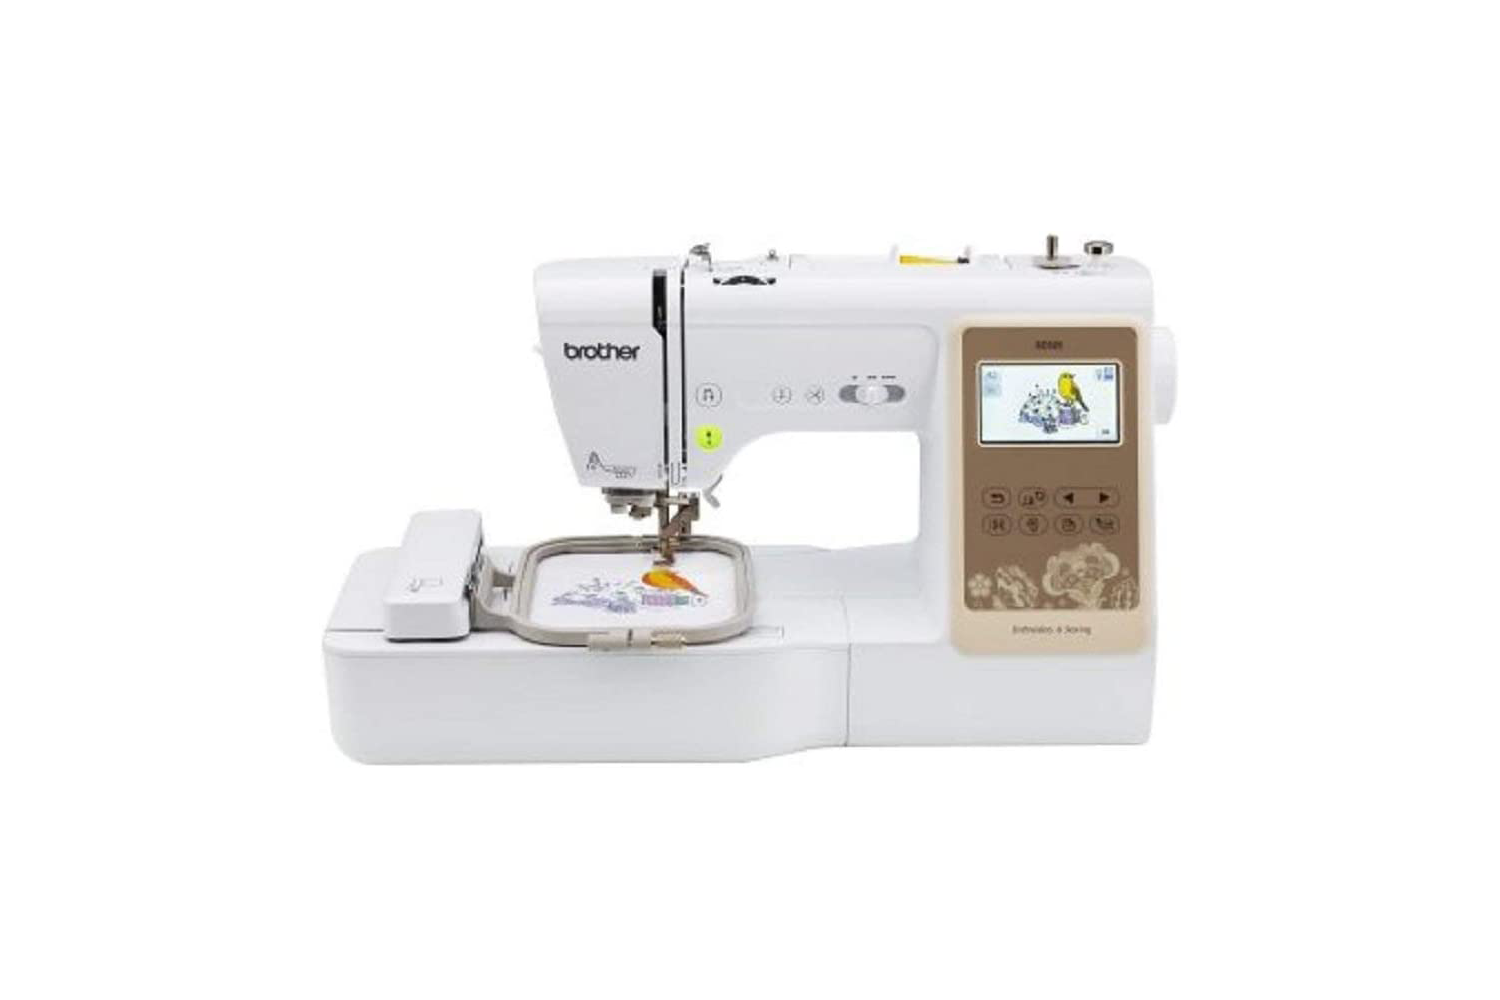 Brother SE625 Sewing and Embroidery Machine 4x4